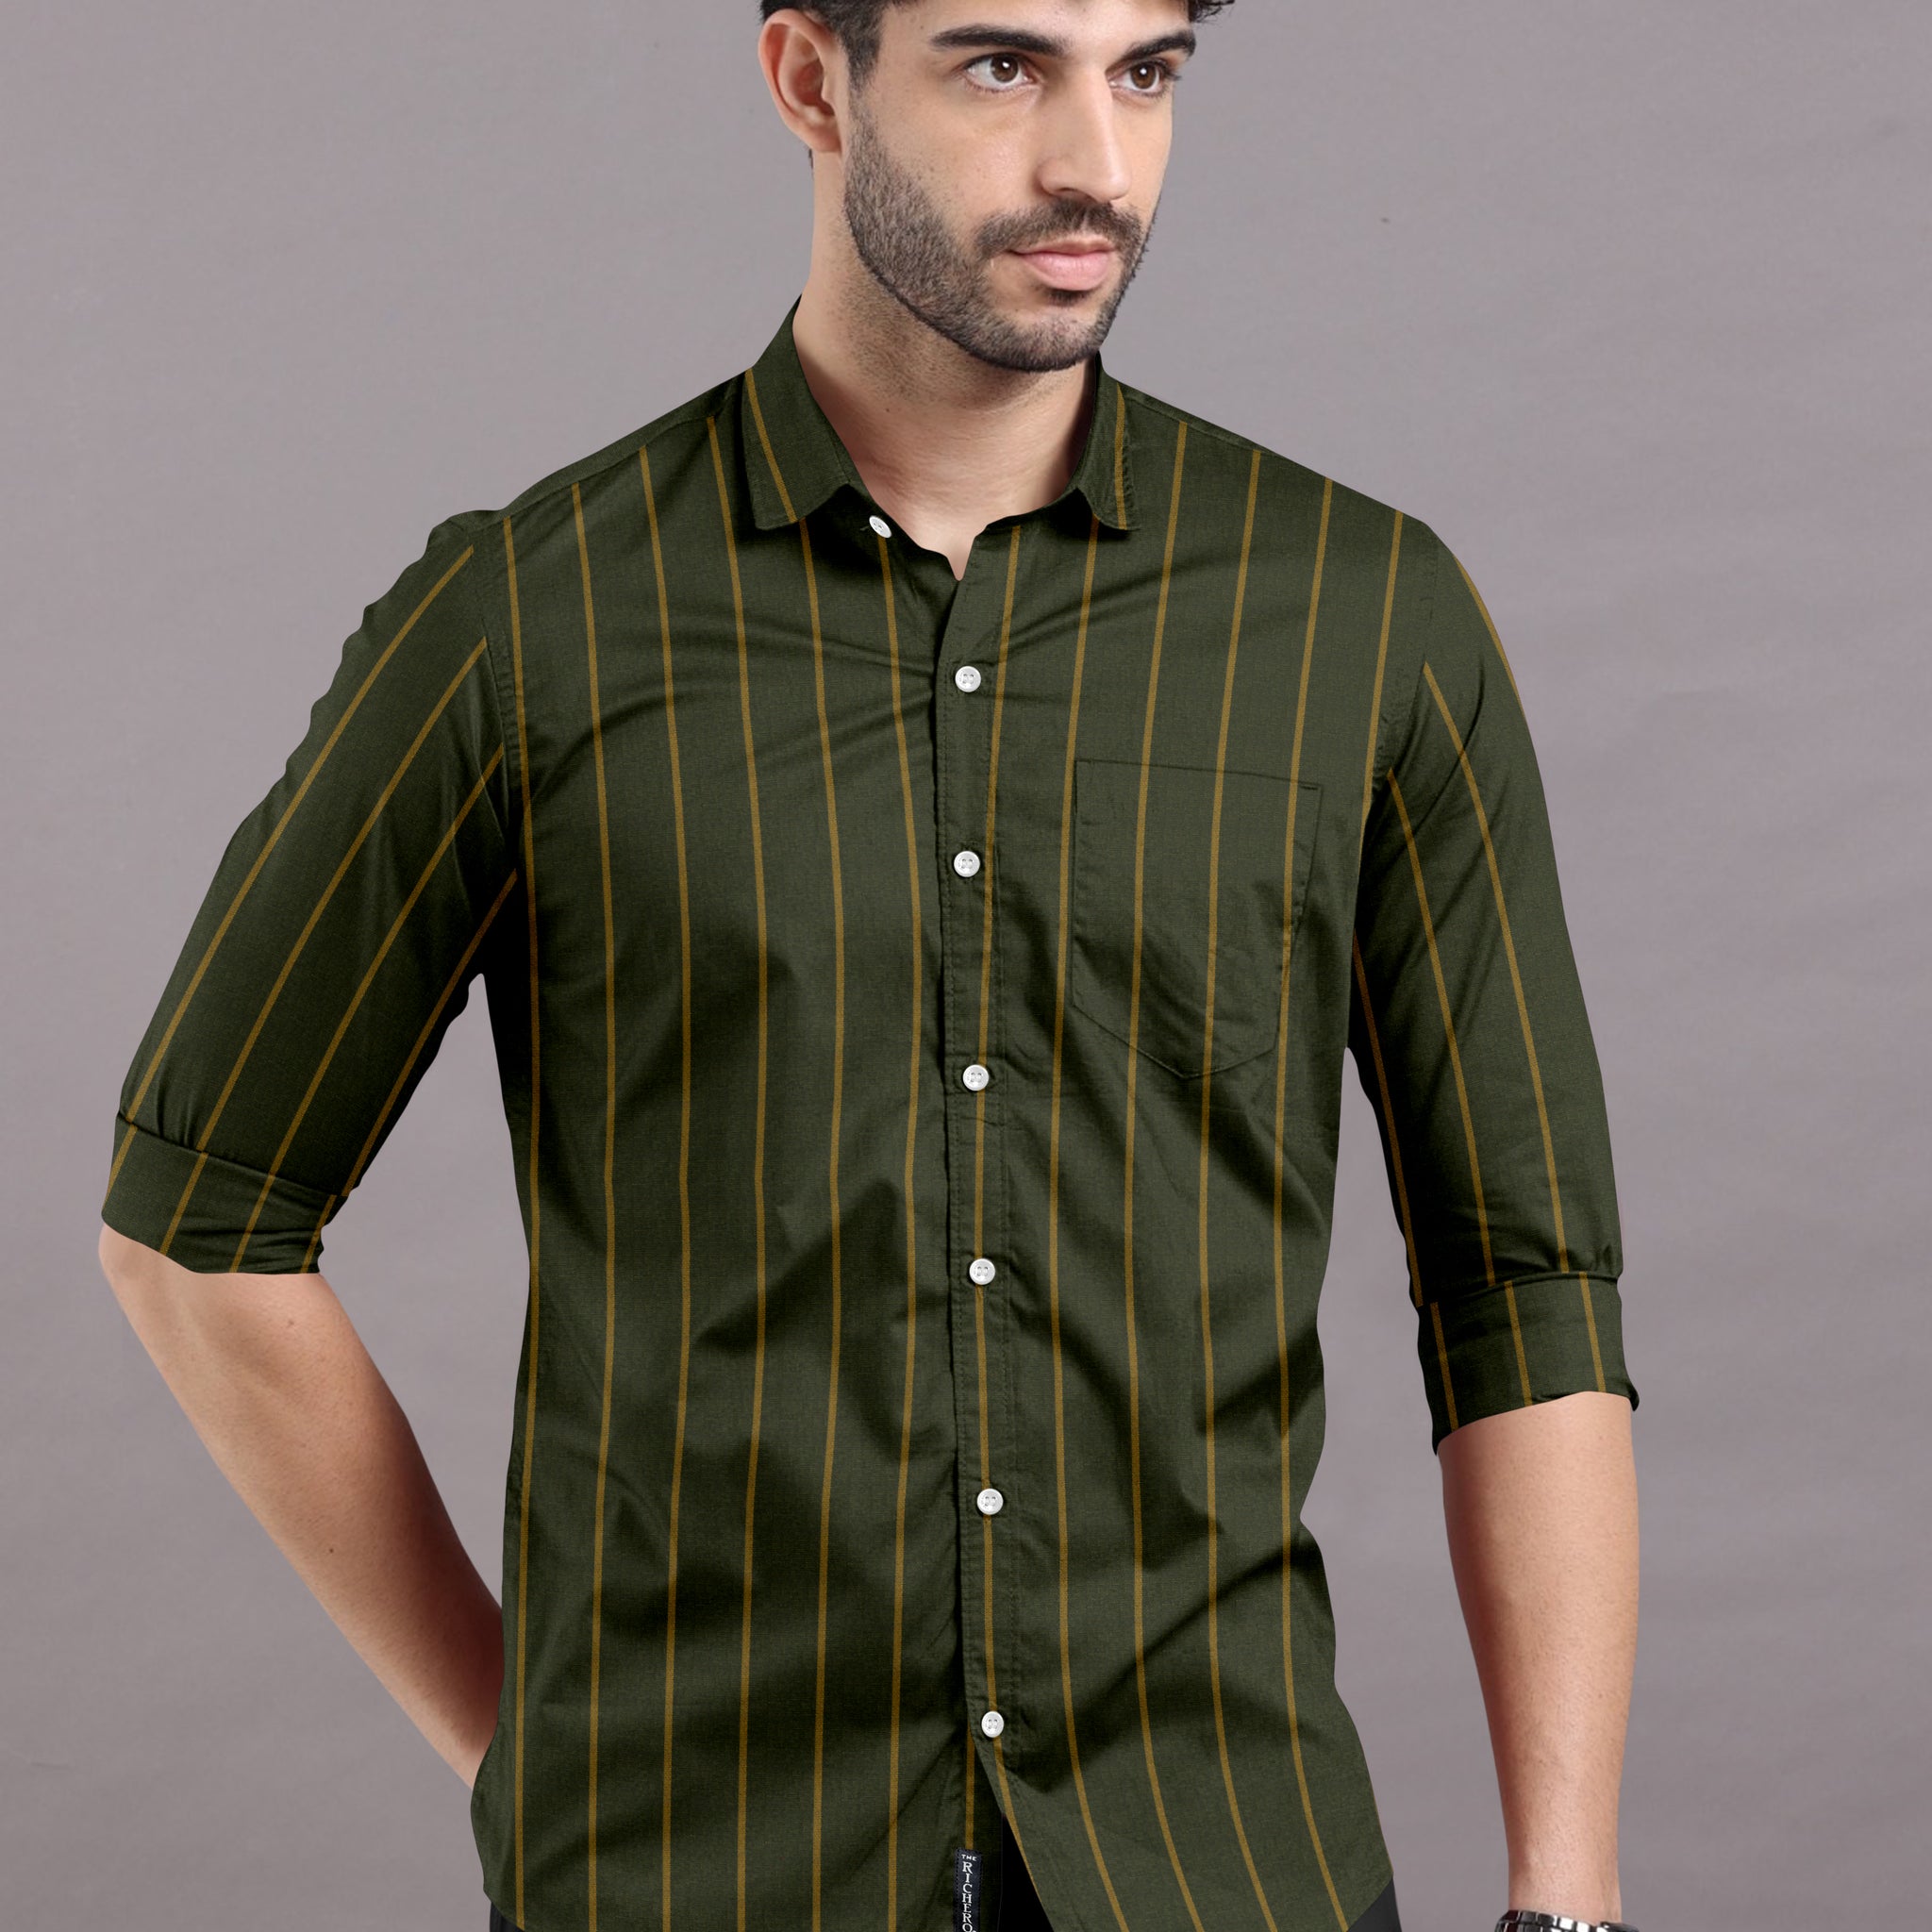 Earthly Stripes Shirt